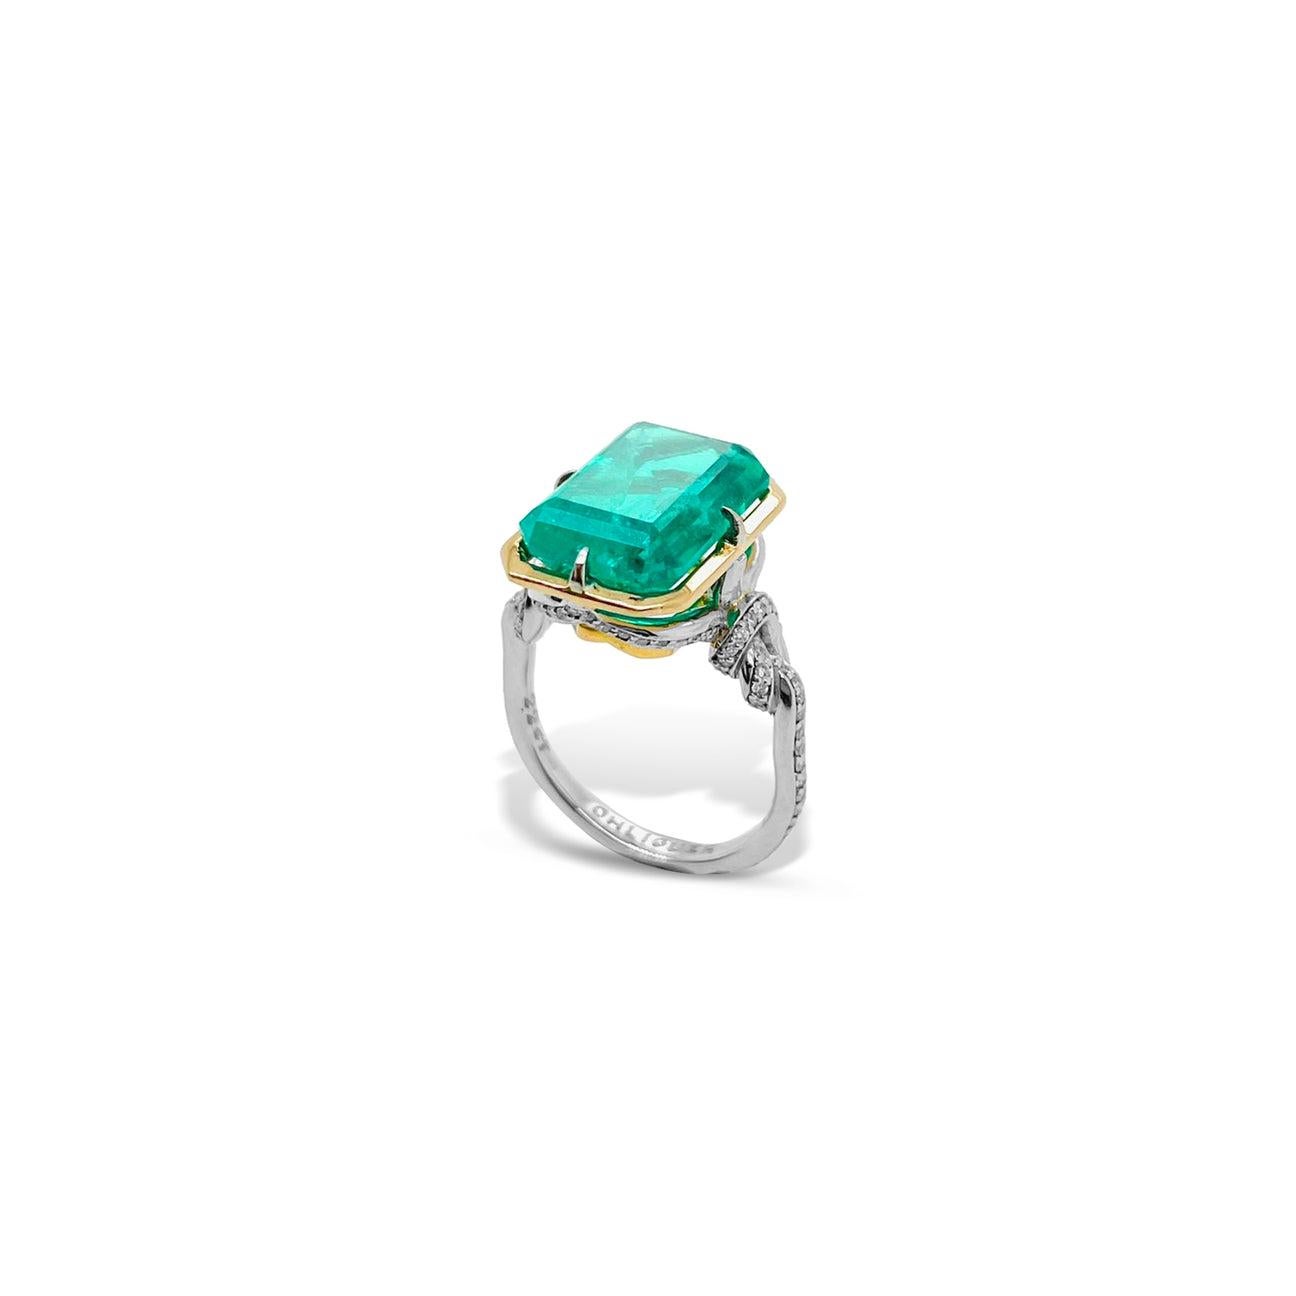 5.79ct Zambian Emerald in Forget Me Knot Style Ring 6